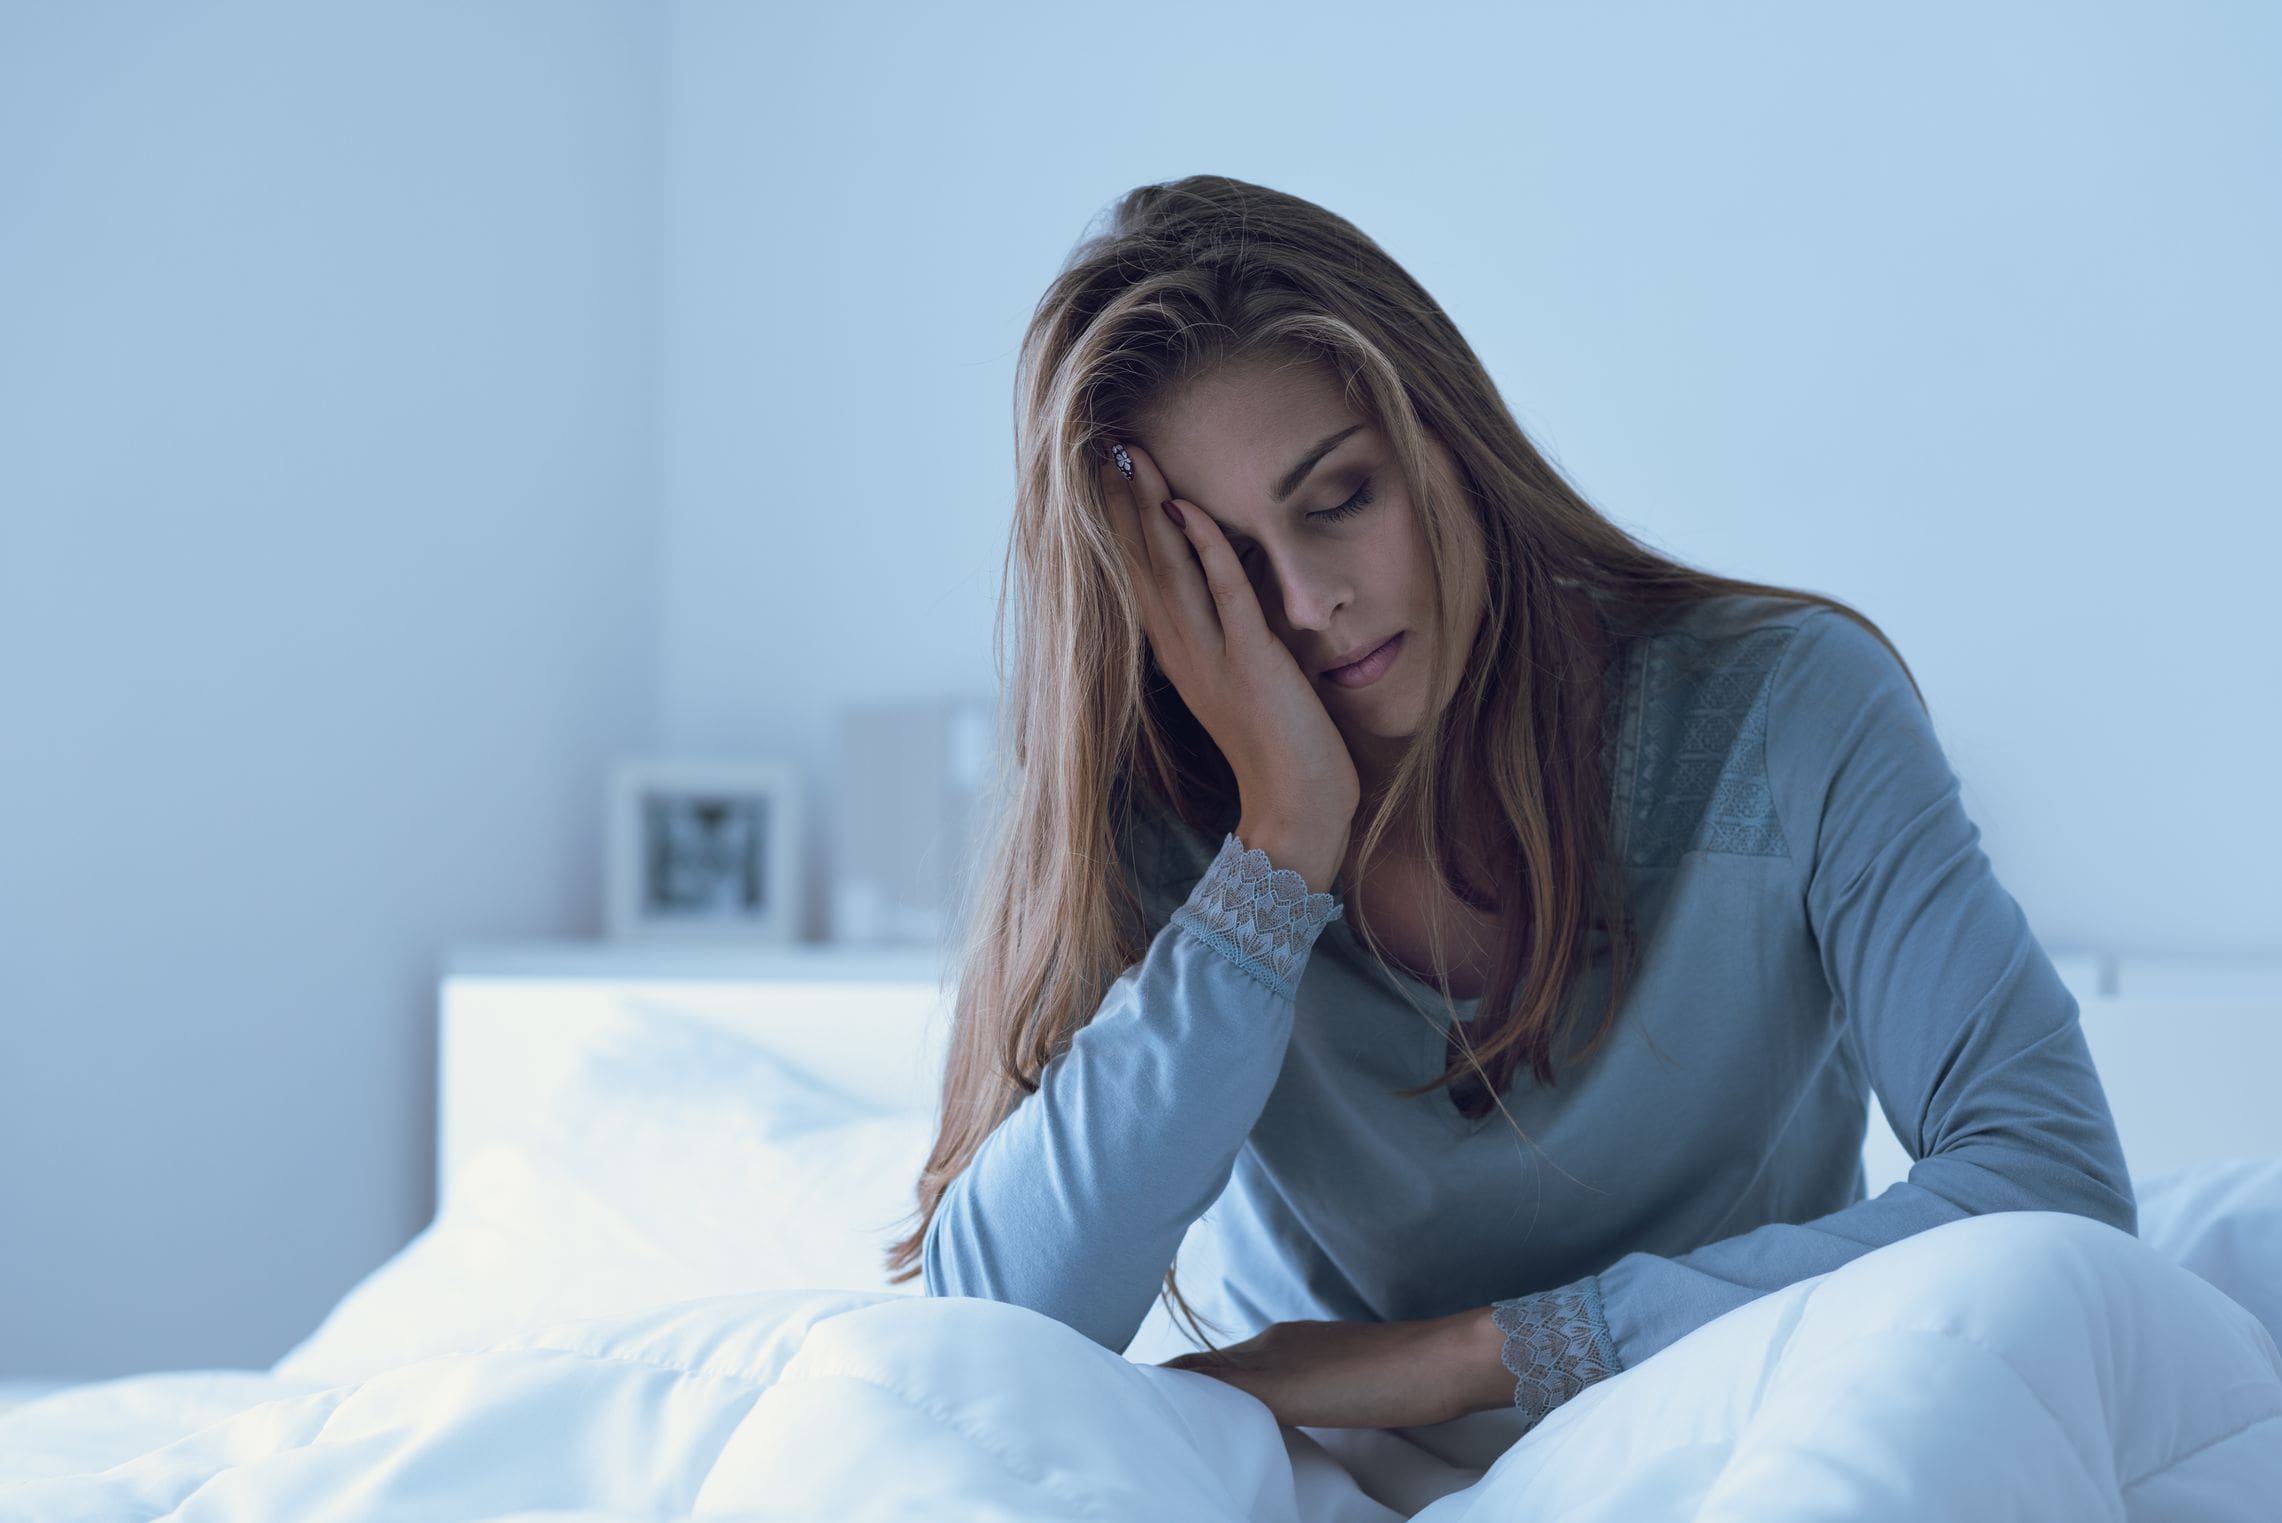 How a lack of sleep hurts the heart